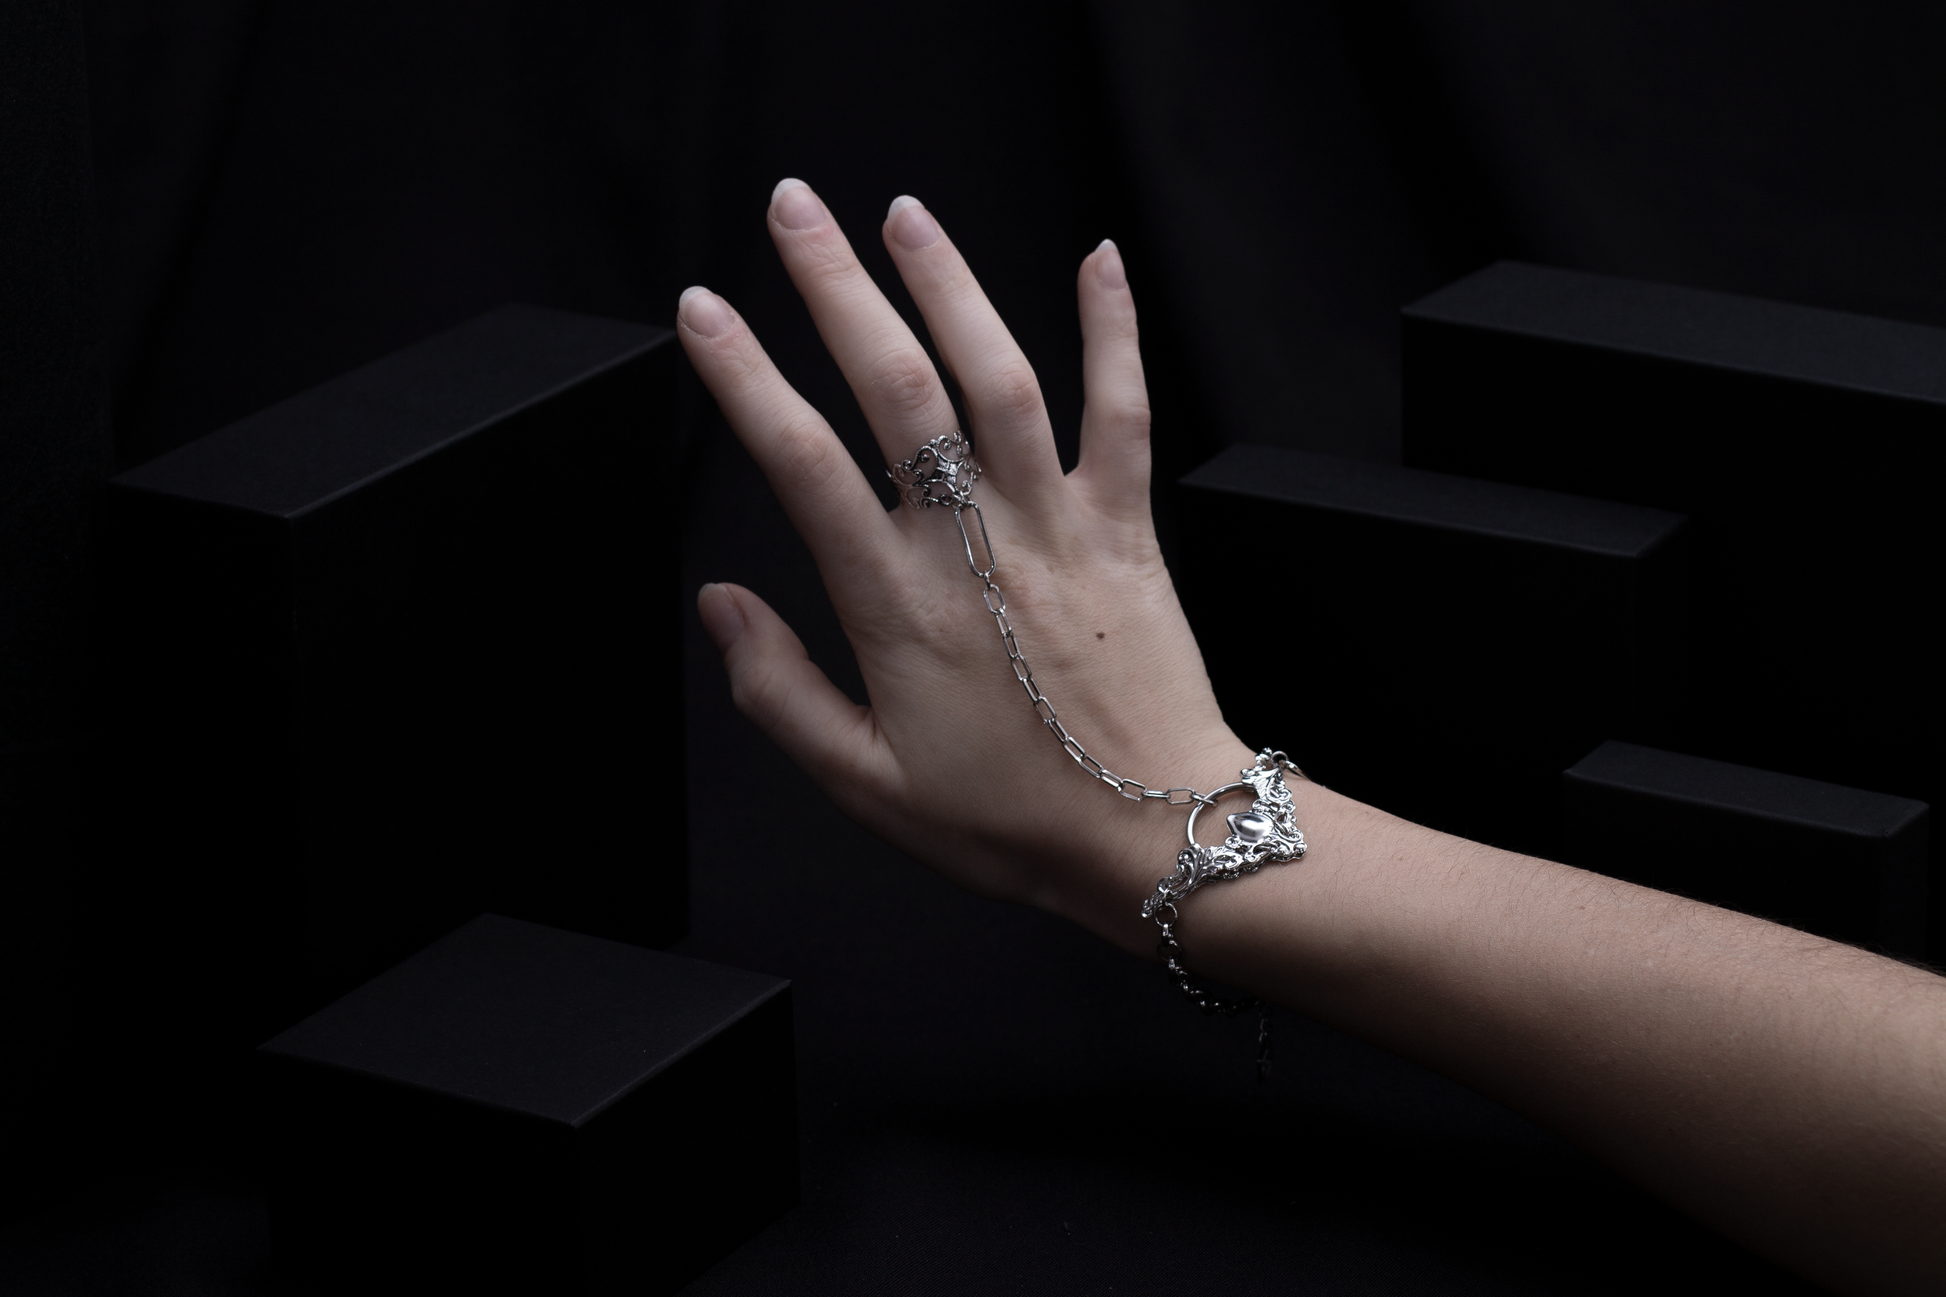 A graceful hand adorned with a Myril Jewels chain bracelet ring, featuring intricate neo-goth detailing, ideal for those seeking dark-avantgarde accessories with a witchcore edge.